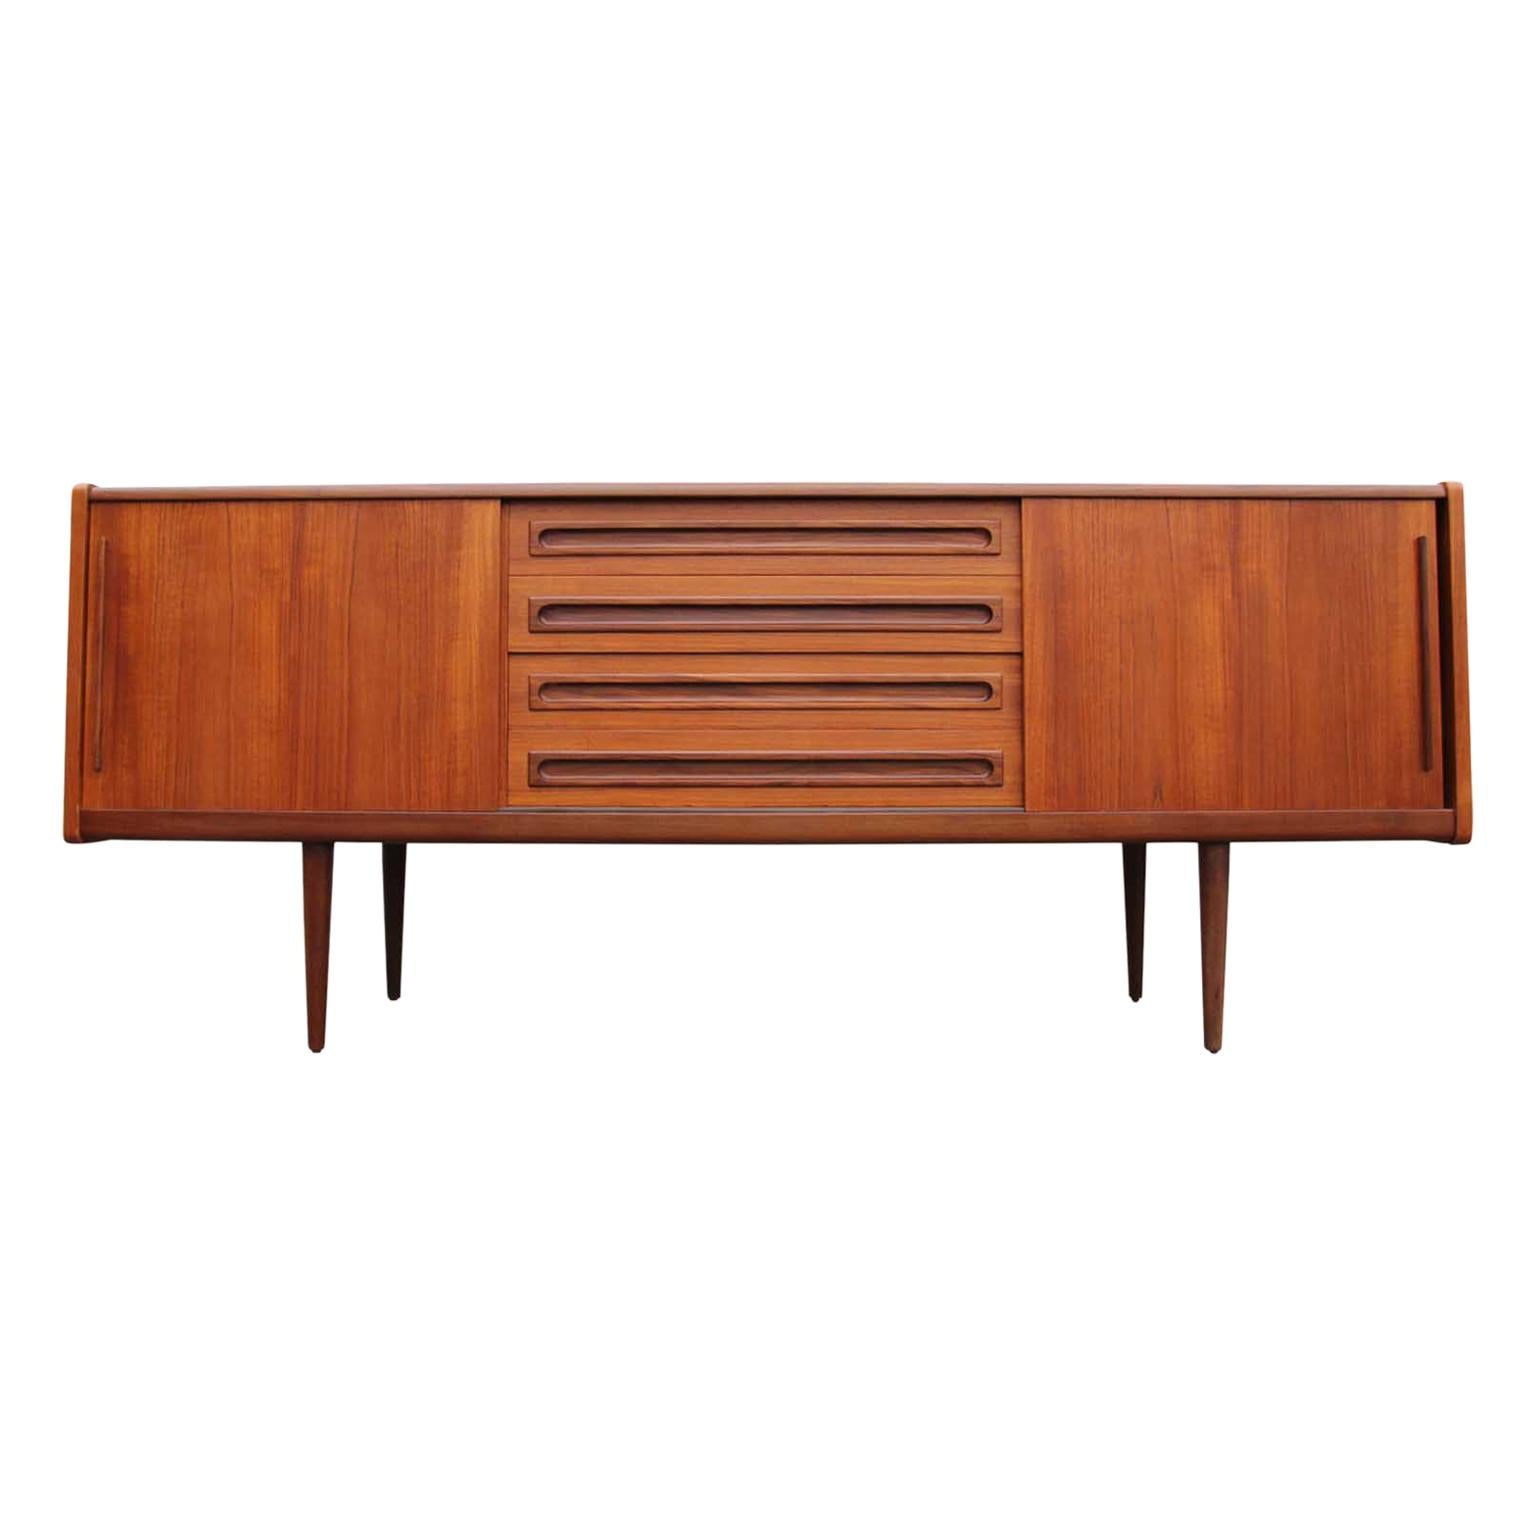 Danish Modern Teak Sideboard / Credenza with Drawers and Sliding Door Cabinets